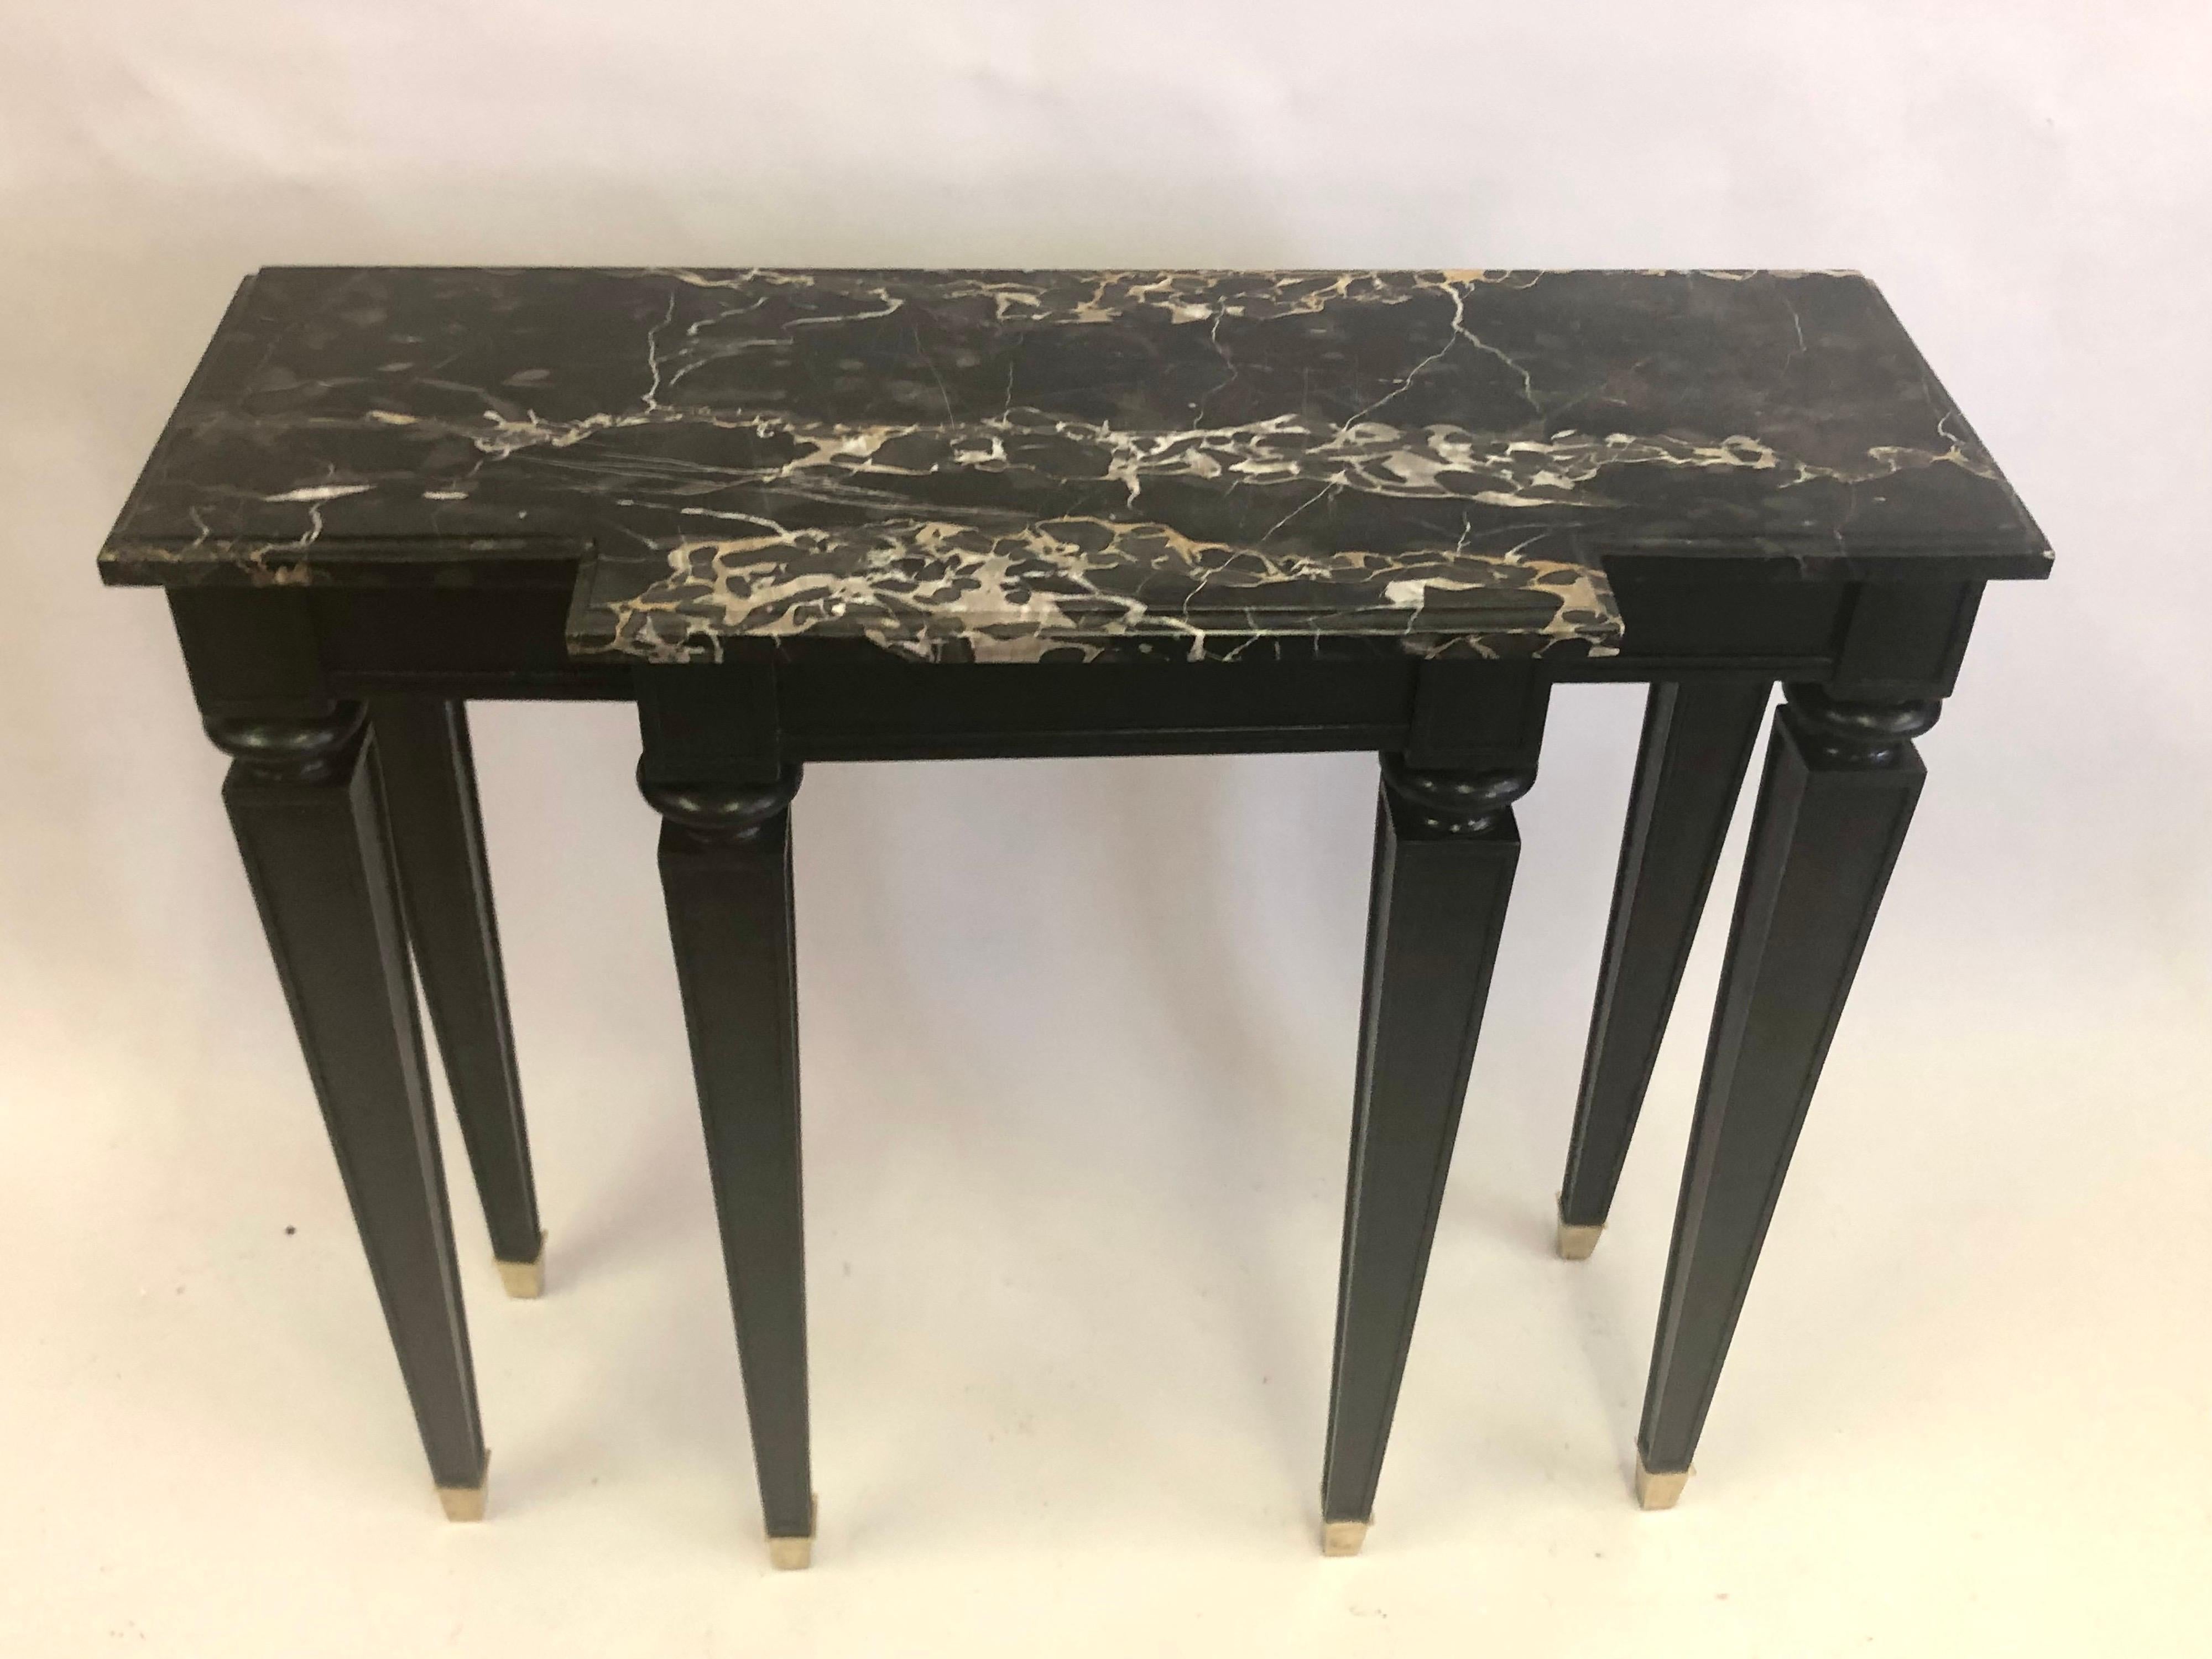 20th Century French 1940 Modern Neoclassical Ebonized Cherry & Marble Console by Andre Arbus